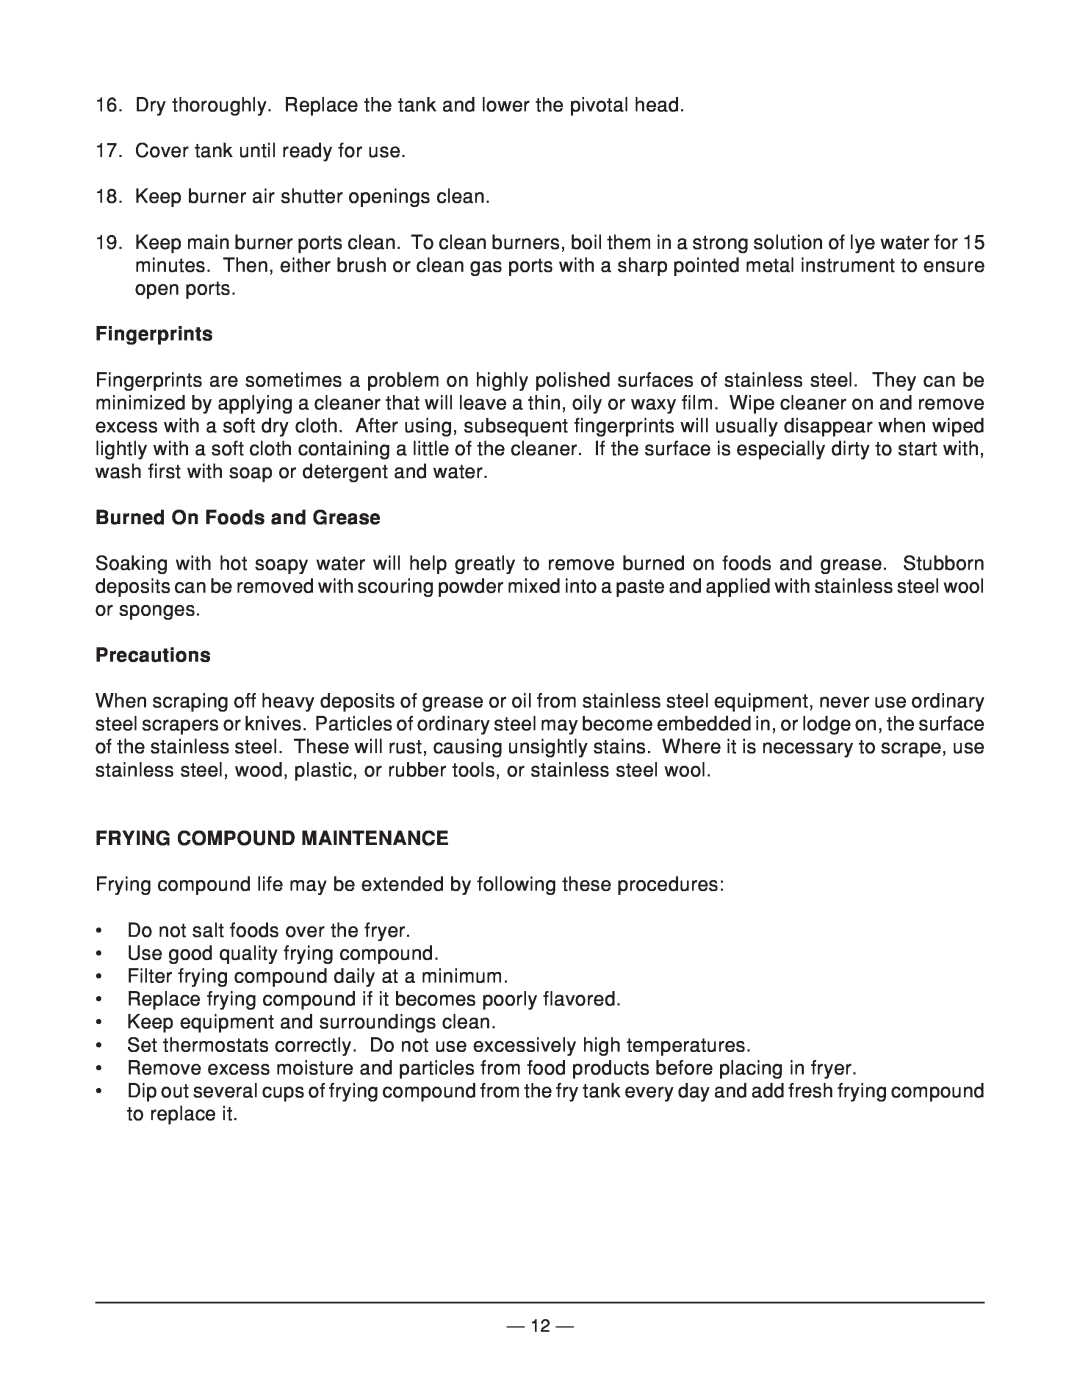 Vulcan-Hart MGF24 operation manual Fingerprints, Burned On Foods and Grease, Precautions, Frying Compound Maintenance 